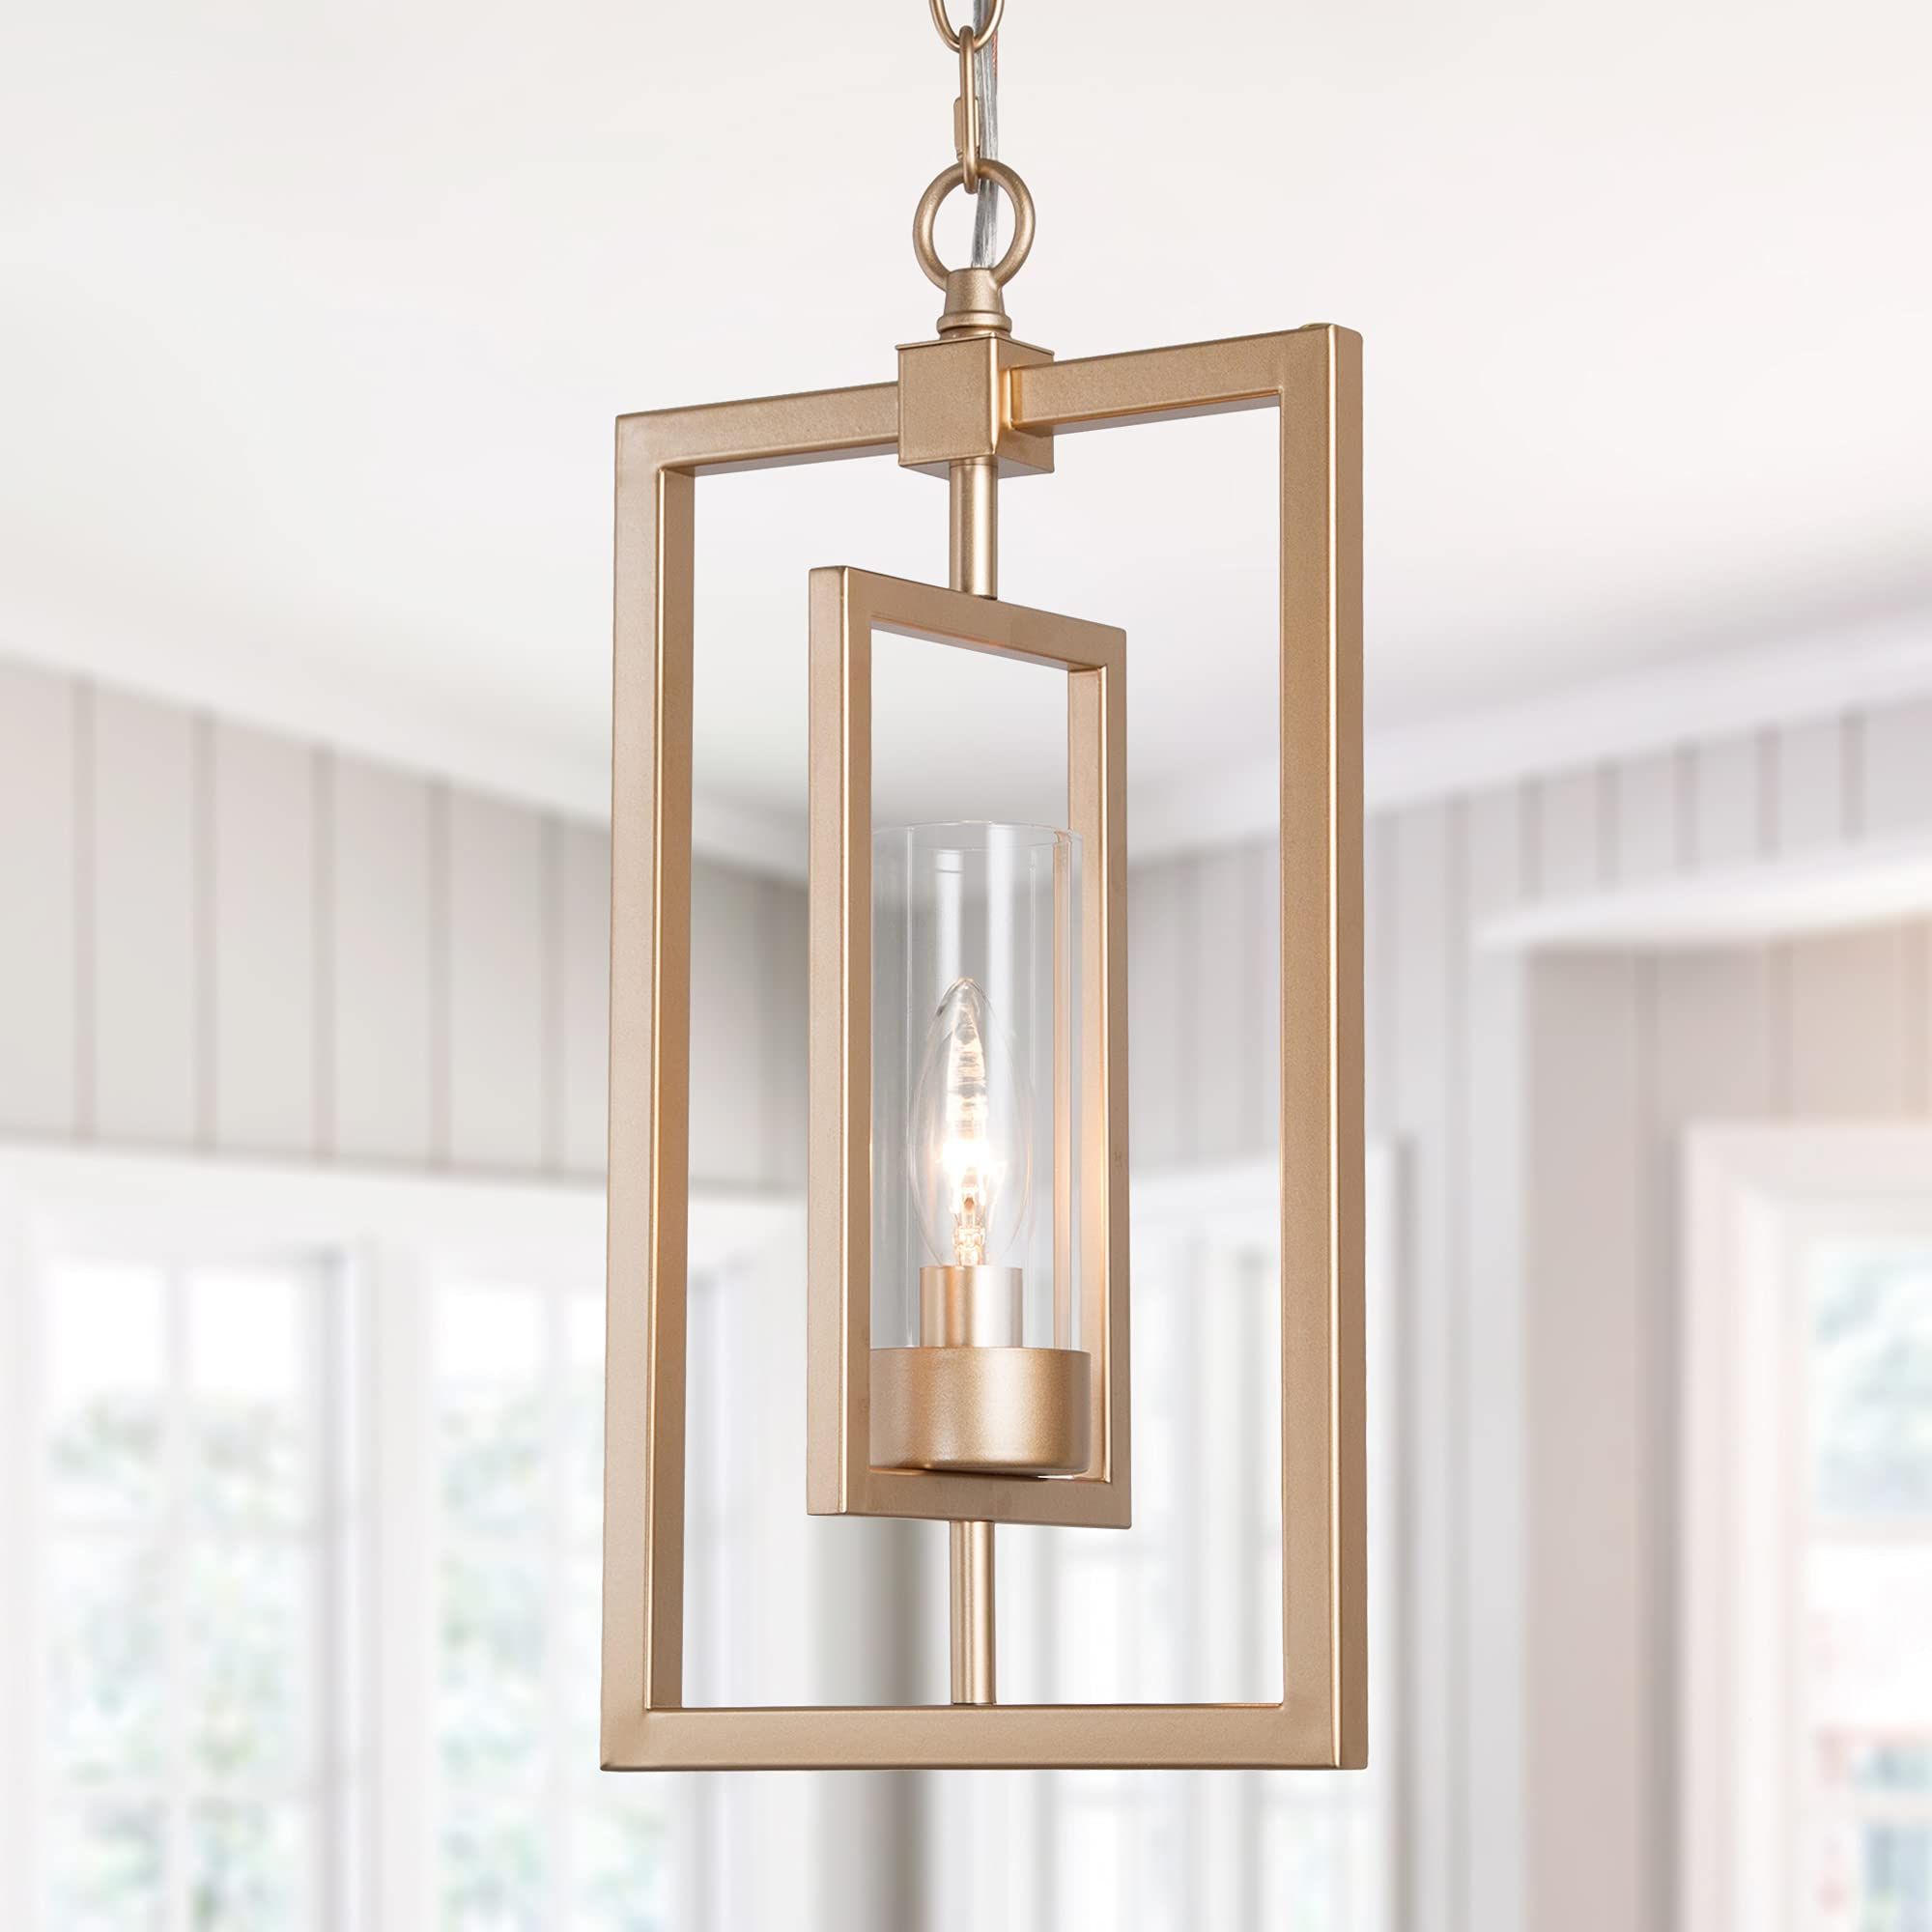 Fashionable Optimant Lighting Gold Pendant Lighting For Kitchen Island, 1 Light Modern  Glass Pendant Chandelier Light Fixture With Chain Framework Adjustable For  Dining & Living Room Bedroom Foyer Hallway (e12) – – Amazon With Gild One Light Lantern Chandeliers (View 5 of 10)